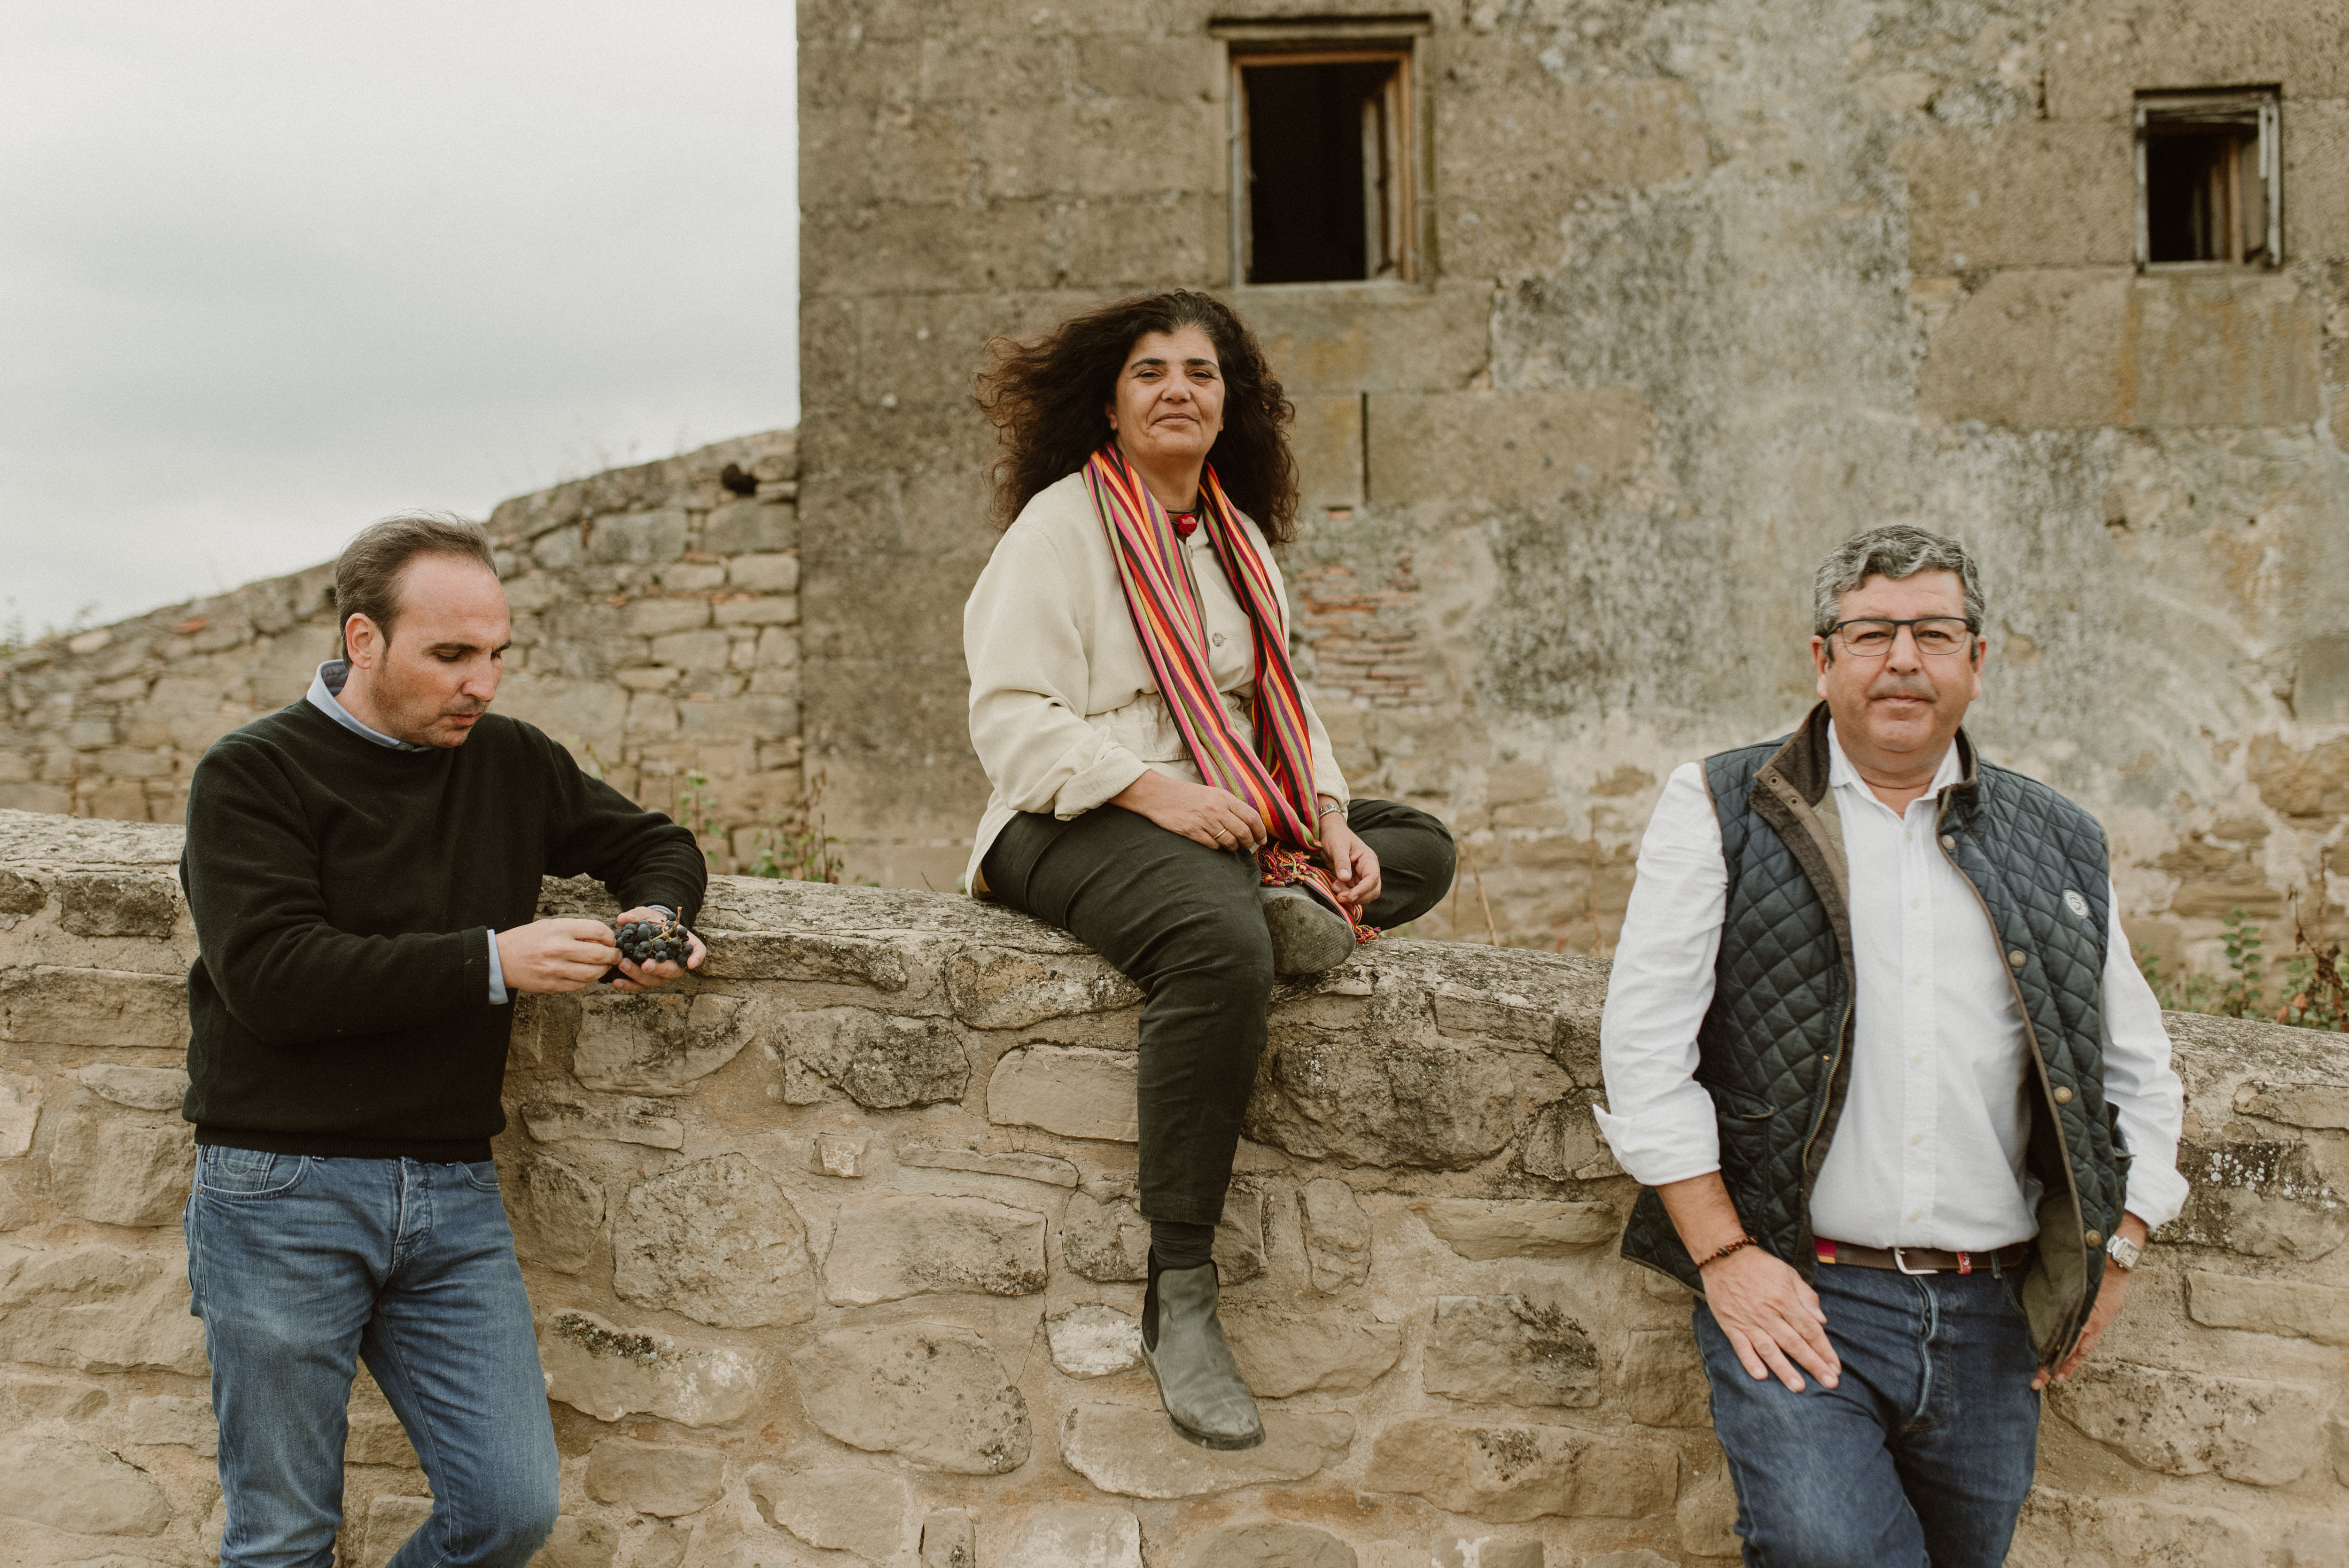 (from left to right) Goyo Gordaliza is the viticulture responsible, Carmen Pérez Garrigues, Jesús Madrazo, the prestigious oenologist who is Villota's cheif winemaker since this 2021 vintage